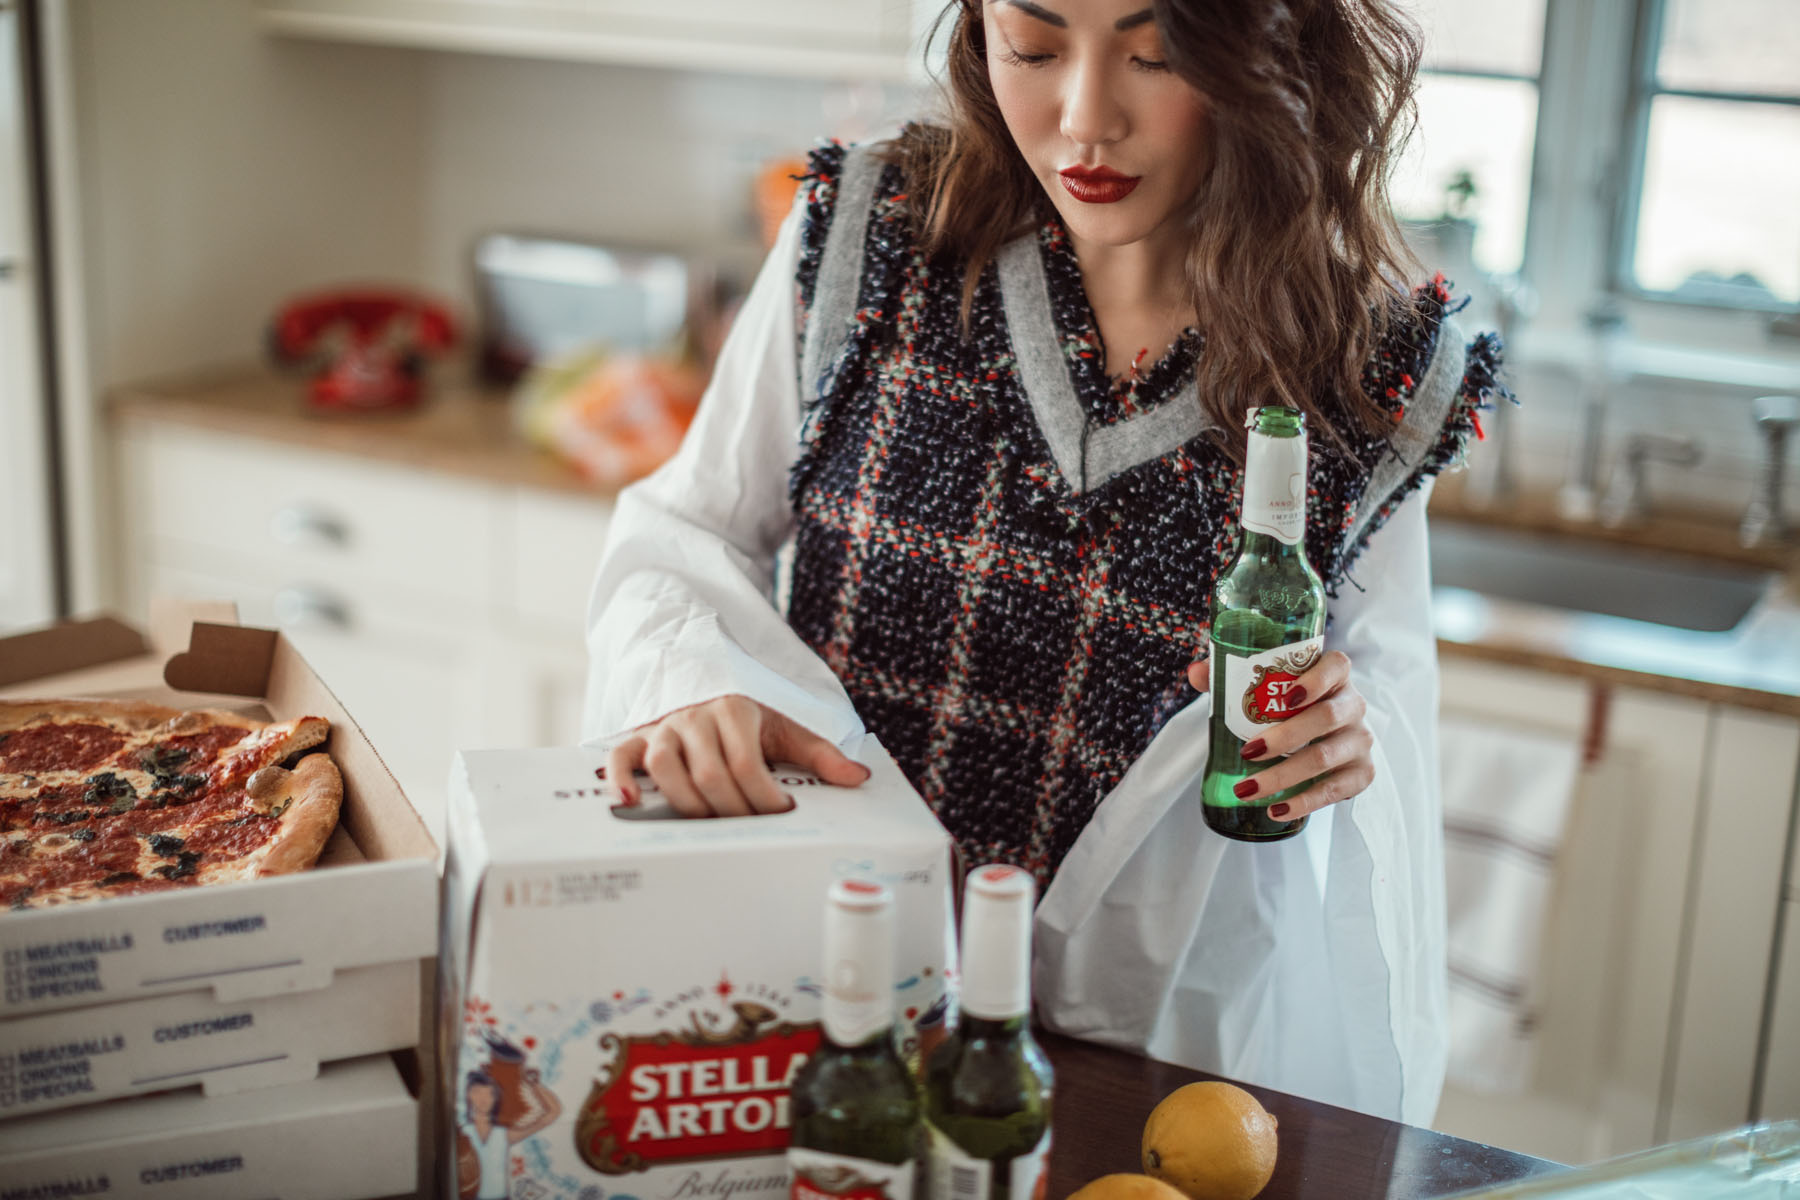 How to Throw a Super Bowl Party That Matters // Notjessfashion // Stella Artois, Super Bowl Party, fashion blogger, new york fashion blogger, jessica wang, pizza and beer